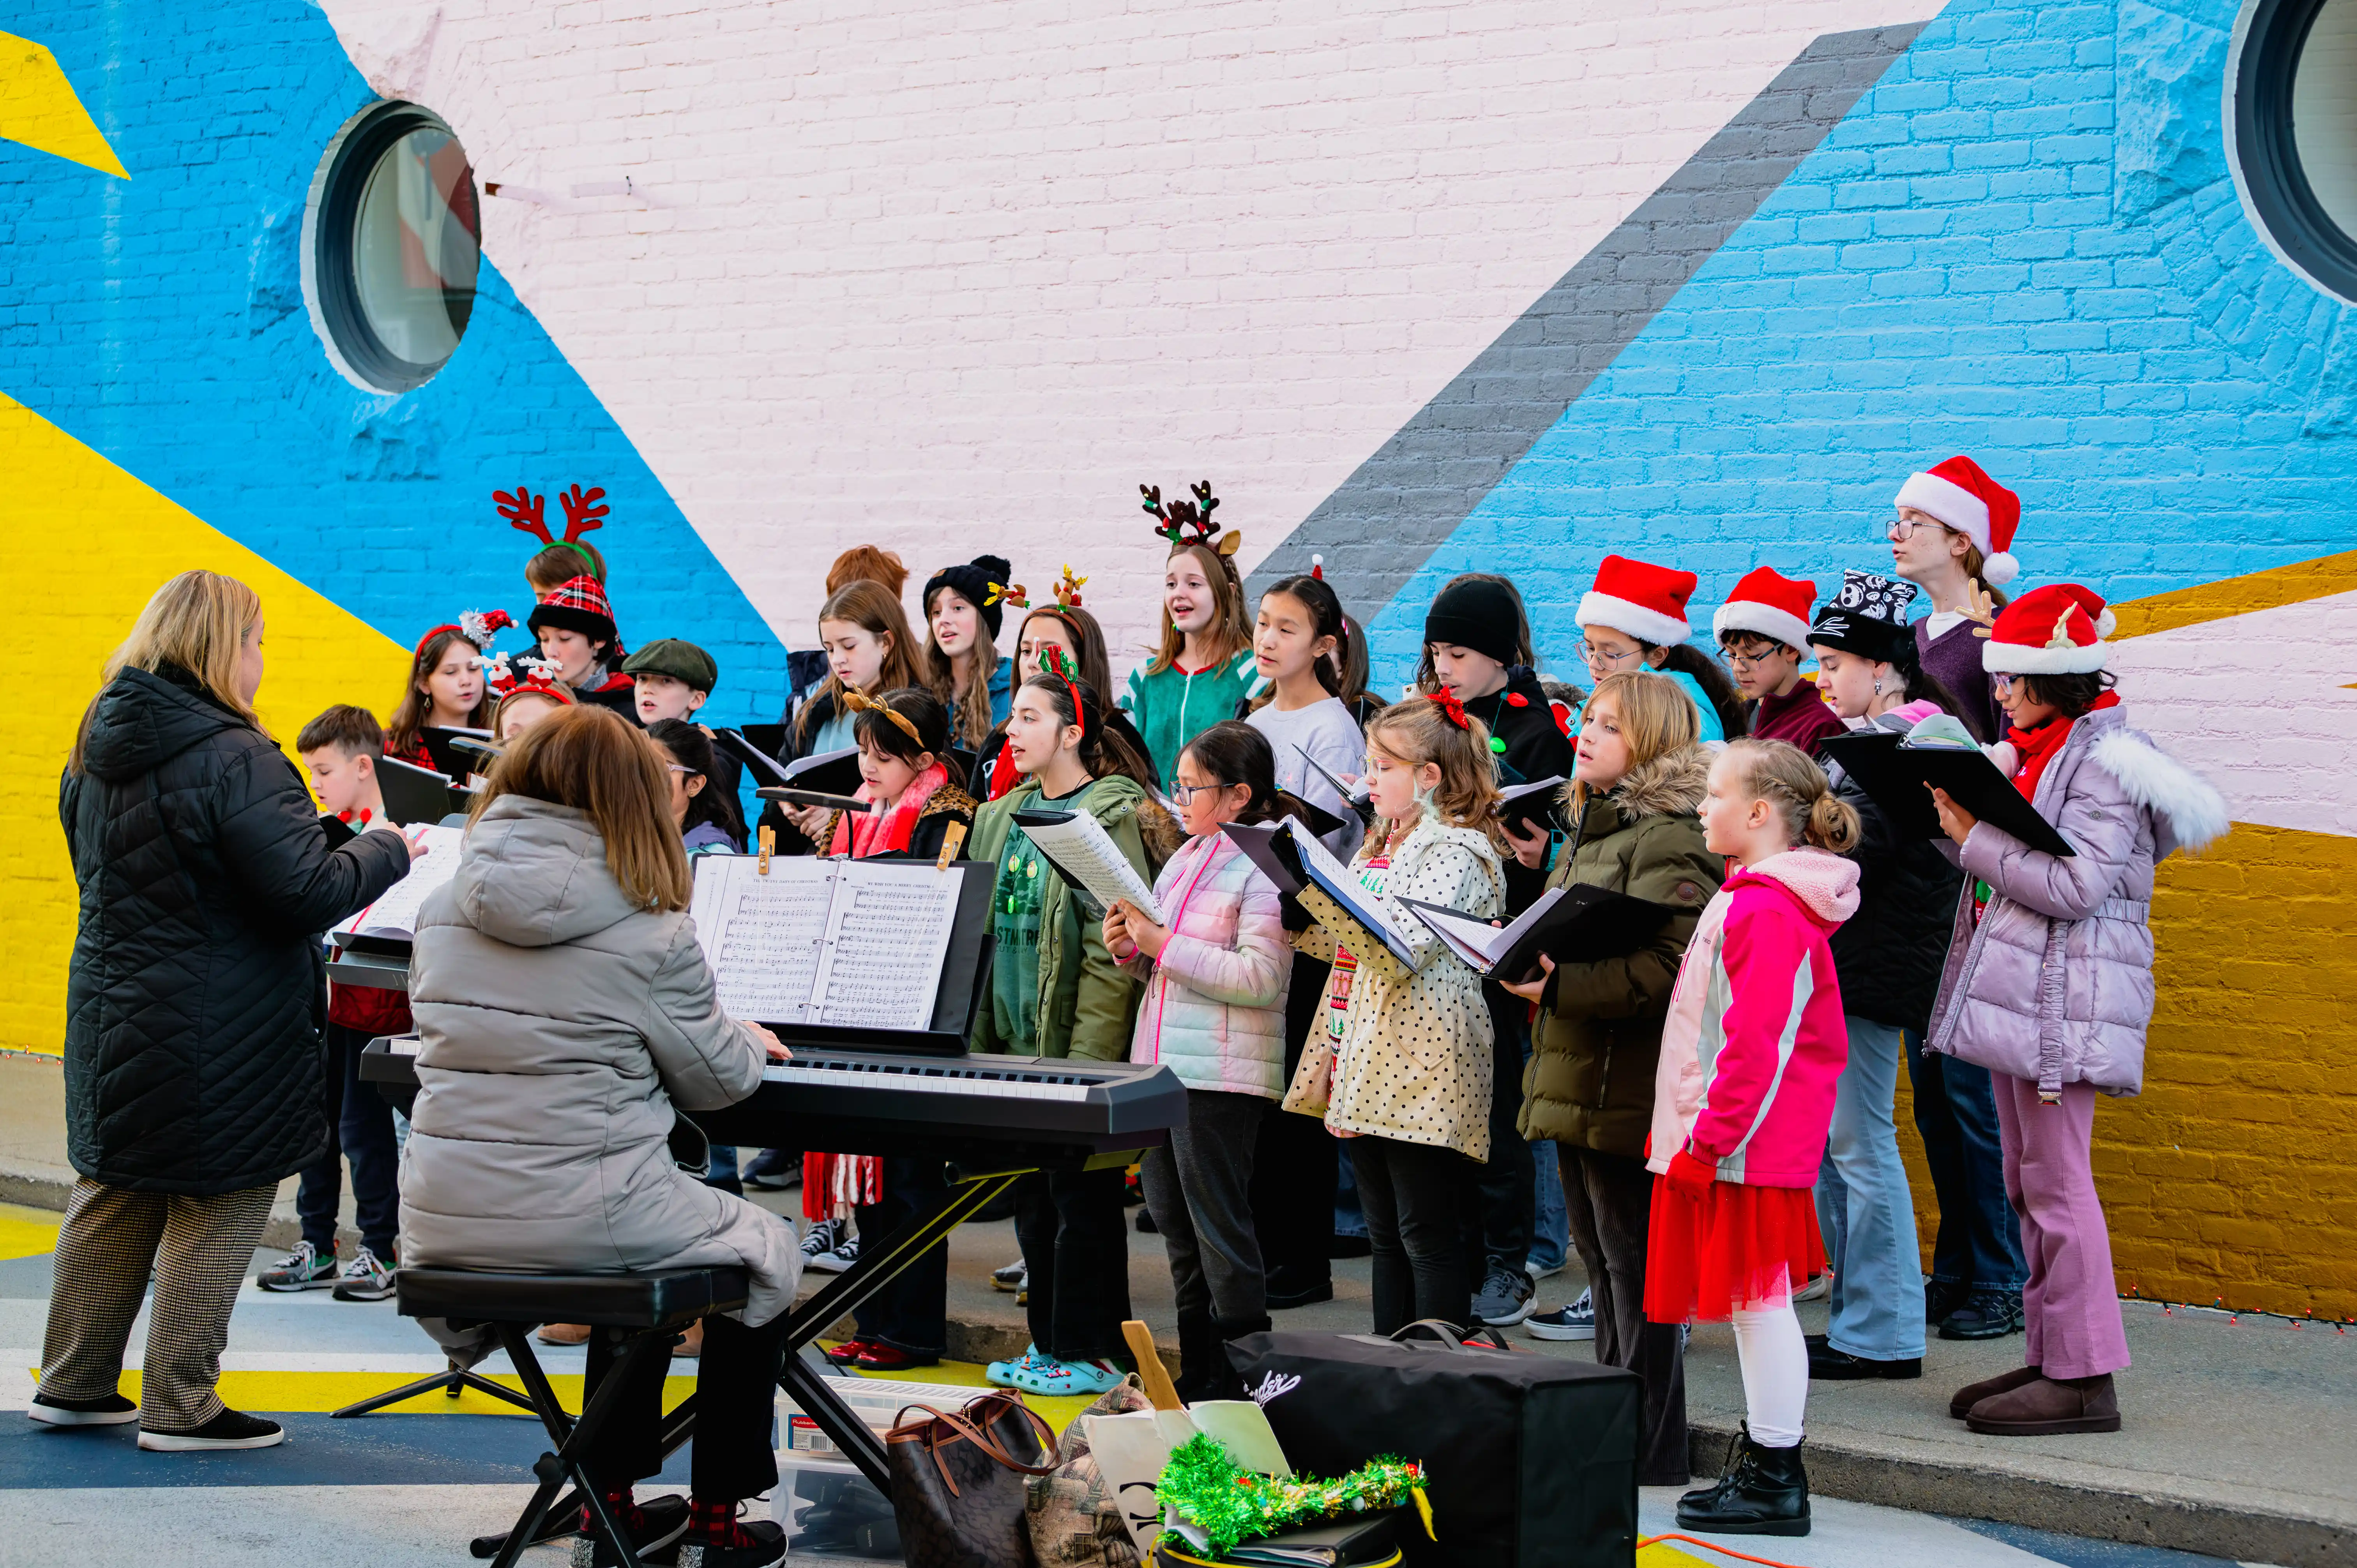 Children's choir performing outdoors with a conductor and pianist, wearing festive holiday attire including Santa hats and reindeer antlers.